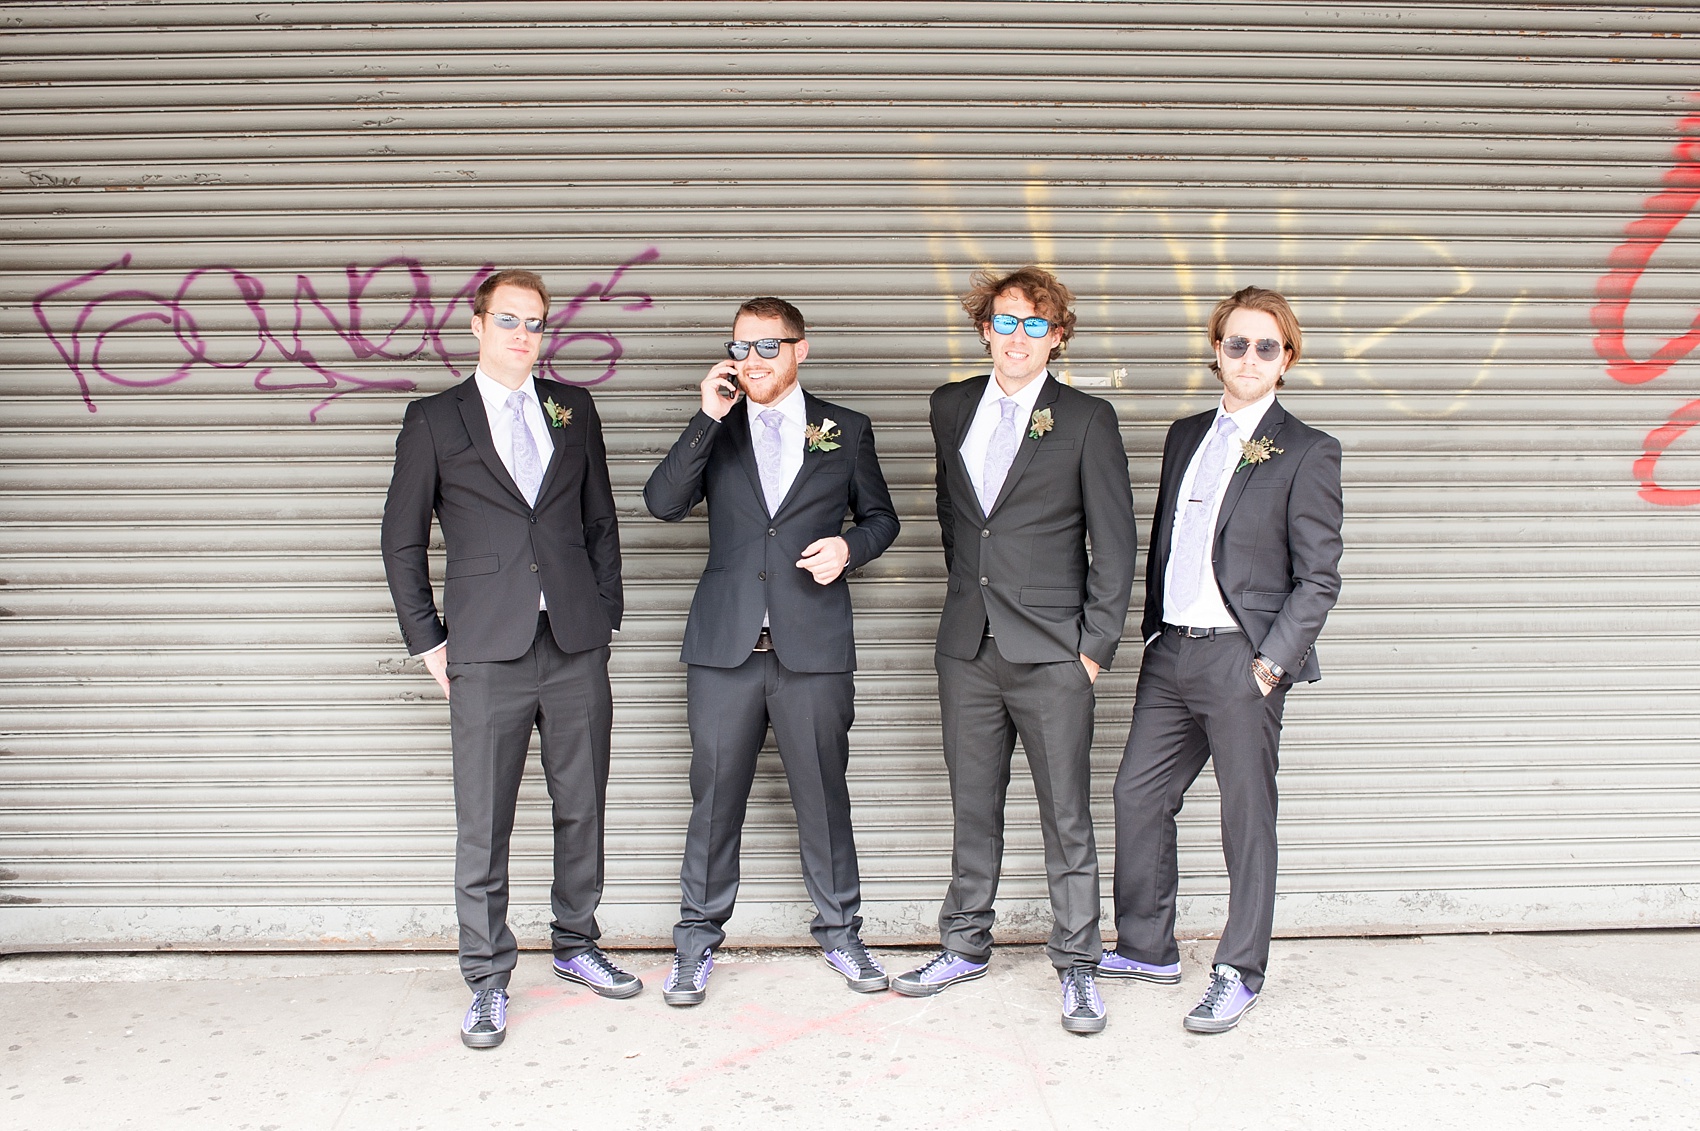 Mikkel Paige Photography photos of a NYC wedding at Tribeca Rooftop. An urban grunge image of the groomsmen.